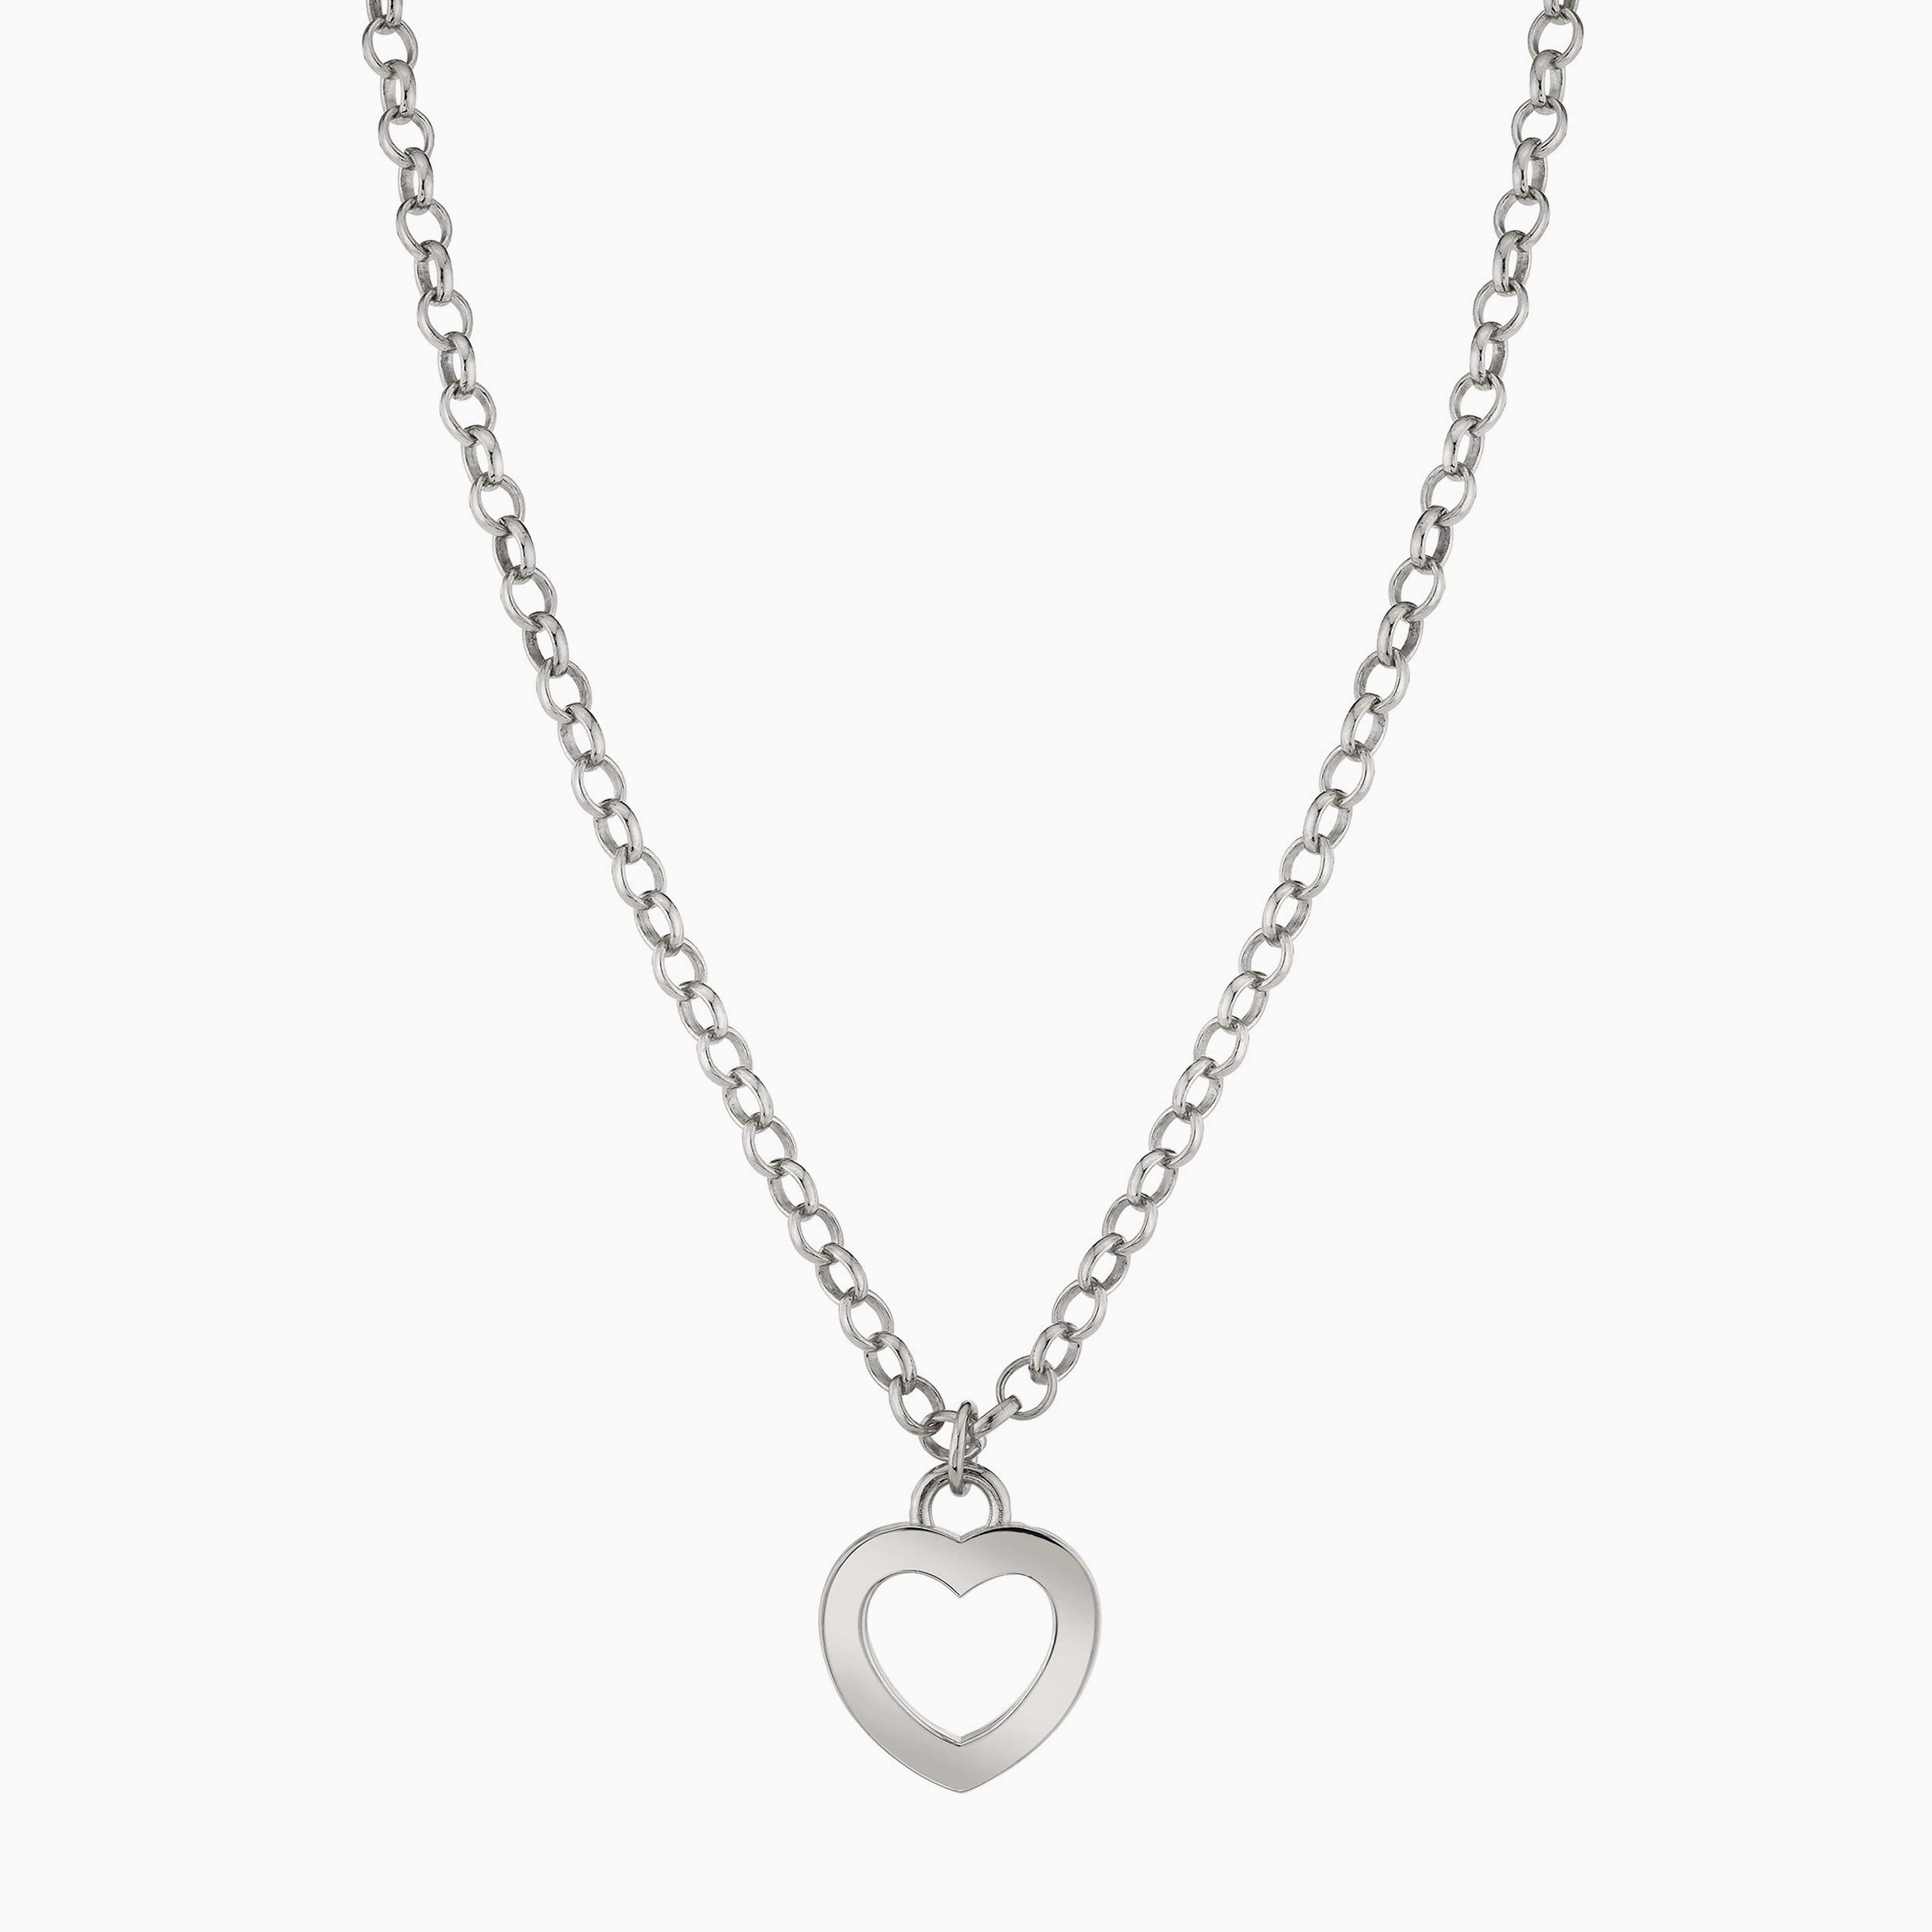 Small Open Heart Charm Necklace